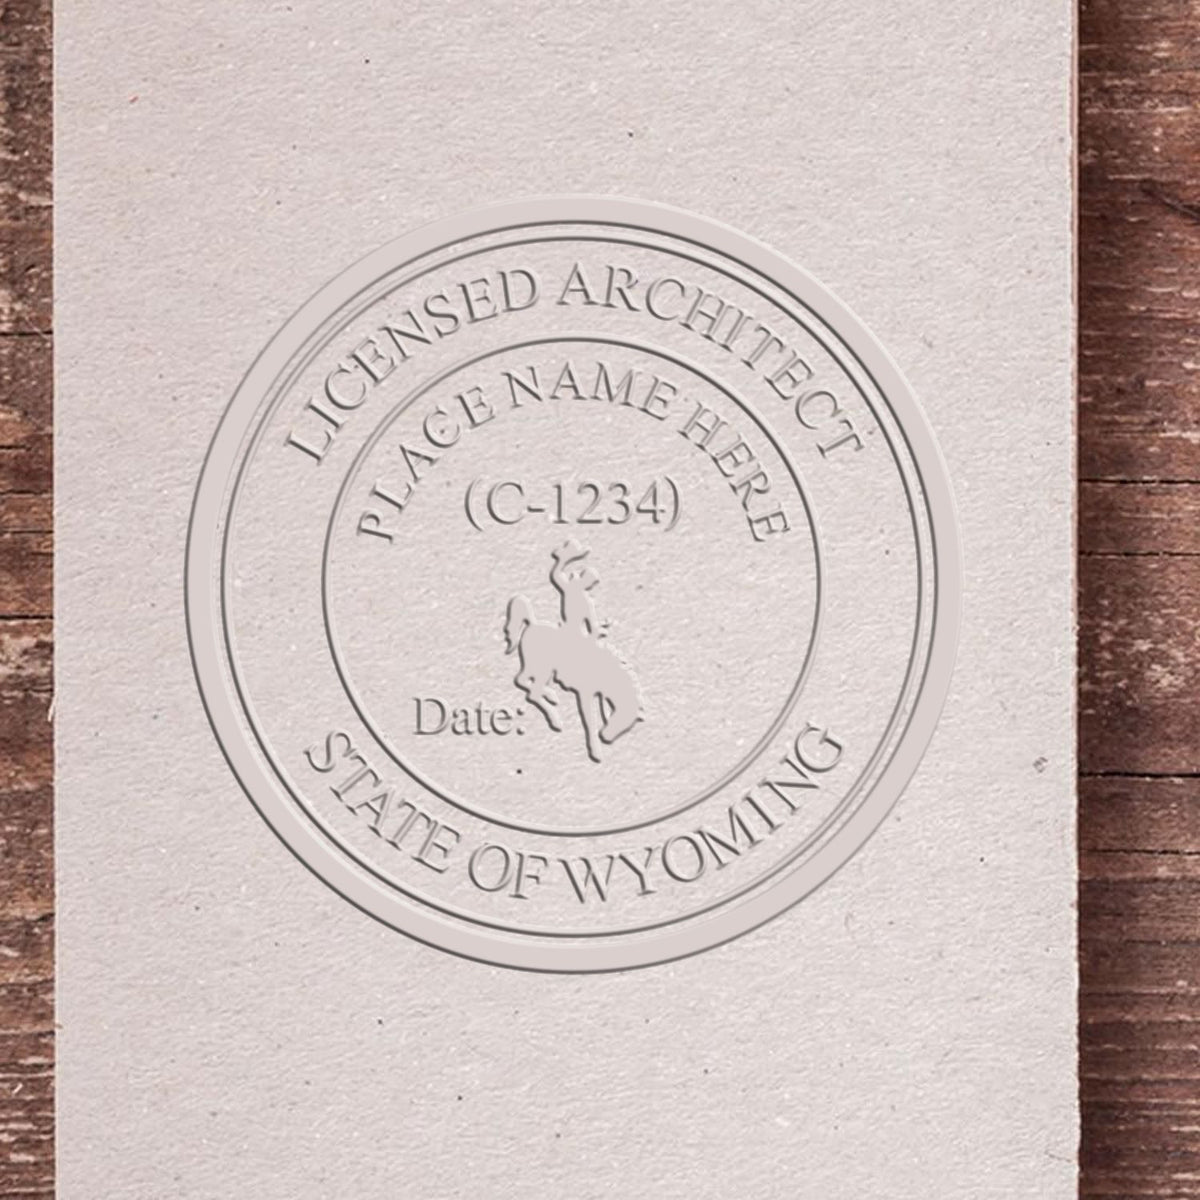 This paper is stamped with a sample imprint of the Extended Long Reach Wyoming Architect Seal Embosser, signifying its quality and reliability.